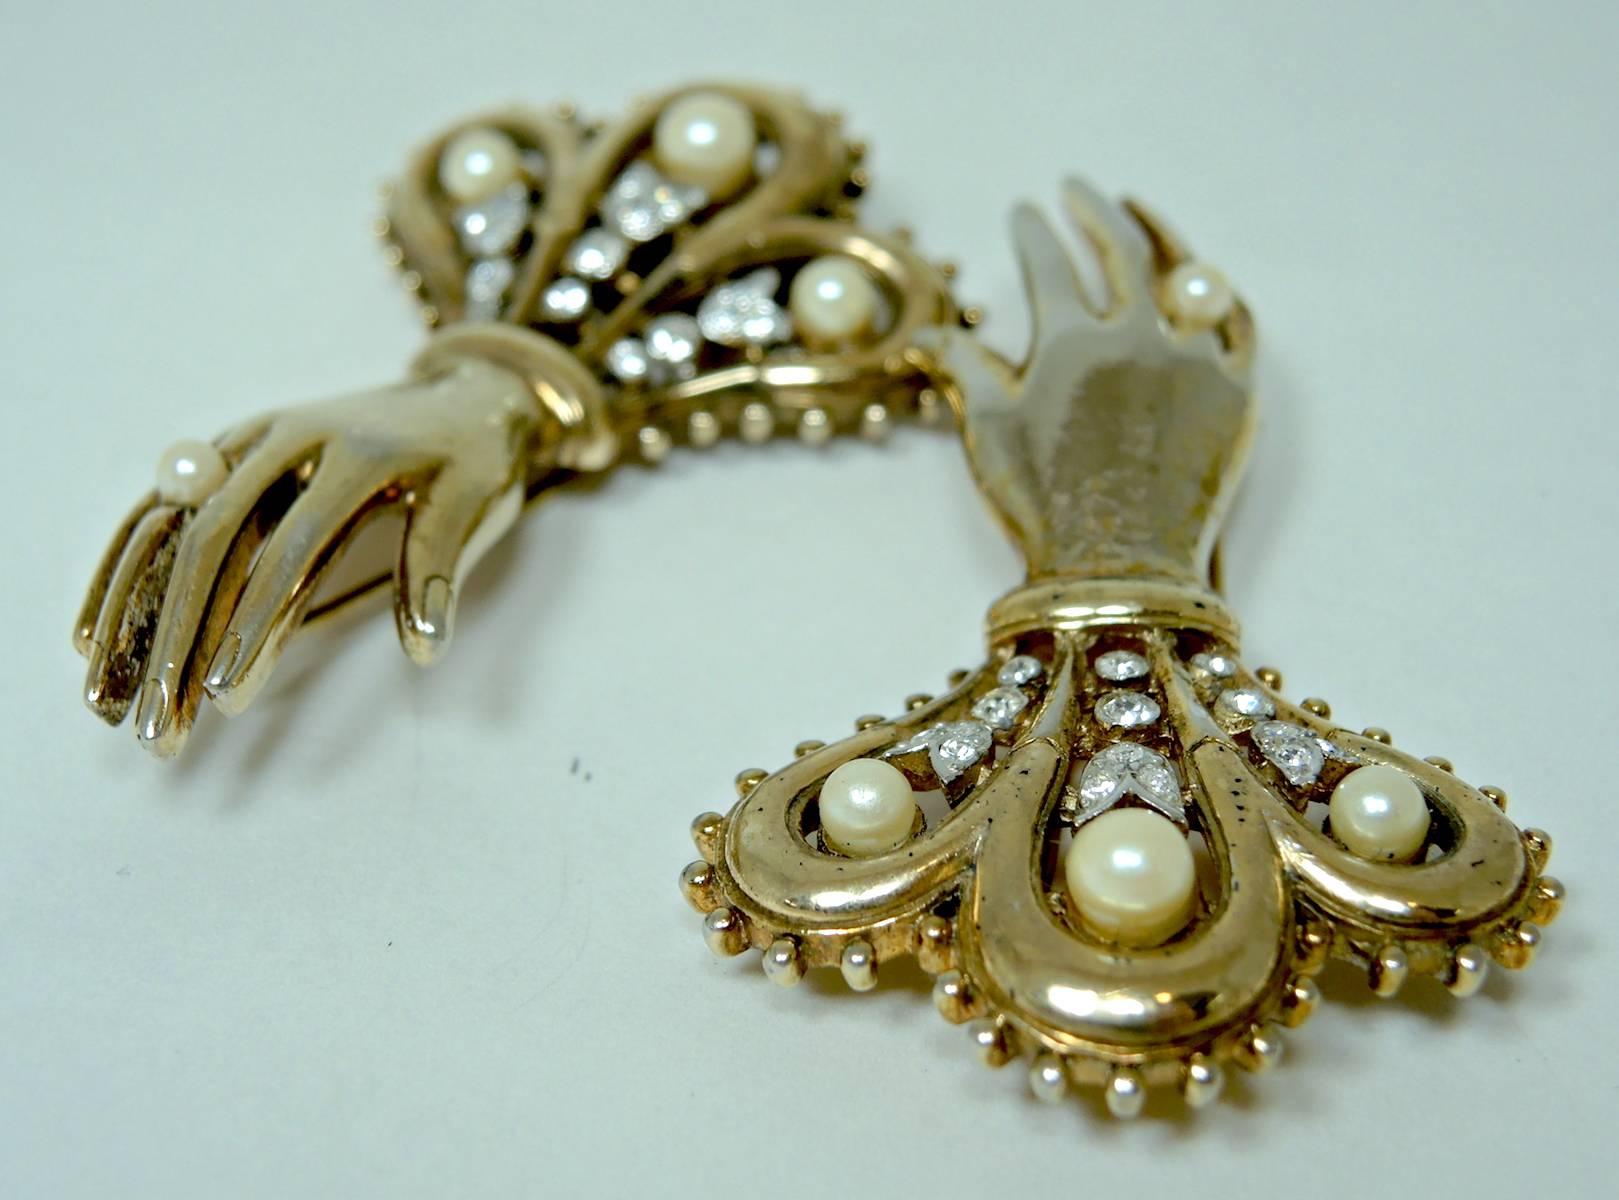 This set of lovely hand fur clips by Trifari was made in the 1940s by Alfred Philippe.  They’re made with sparkling clear rhinestones and faux pearls. It is made in a gold tone setting and measures 2-1/2” x 1-1/2”. It is signed “Trifari” with the